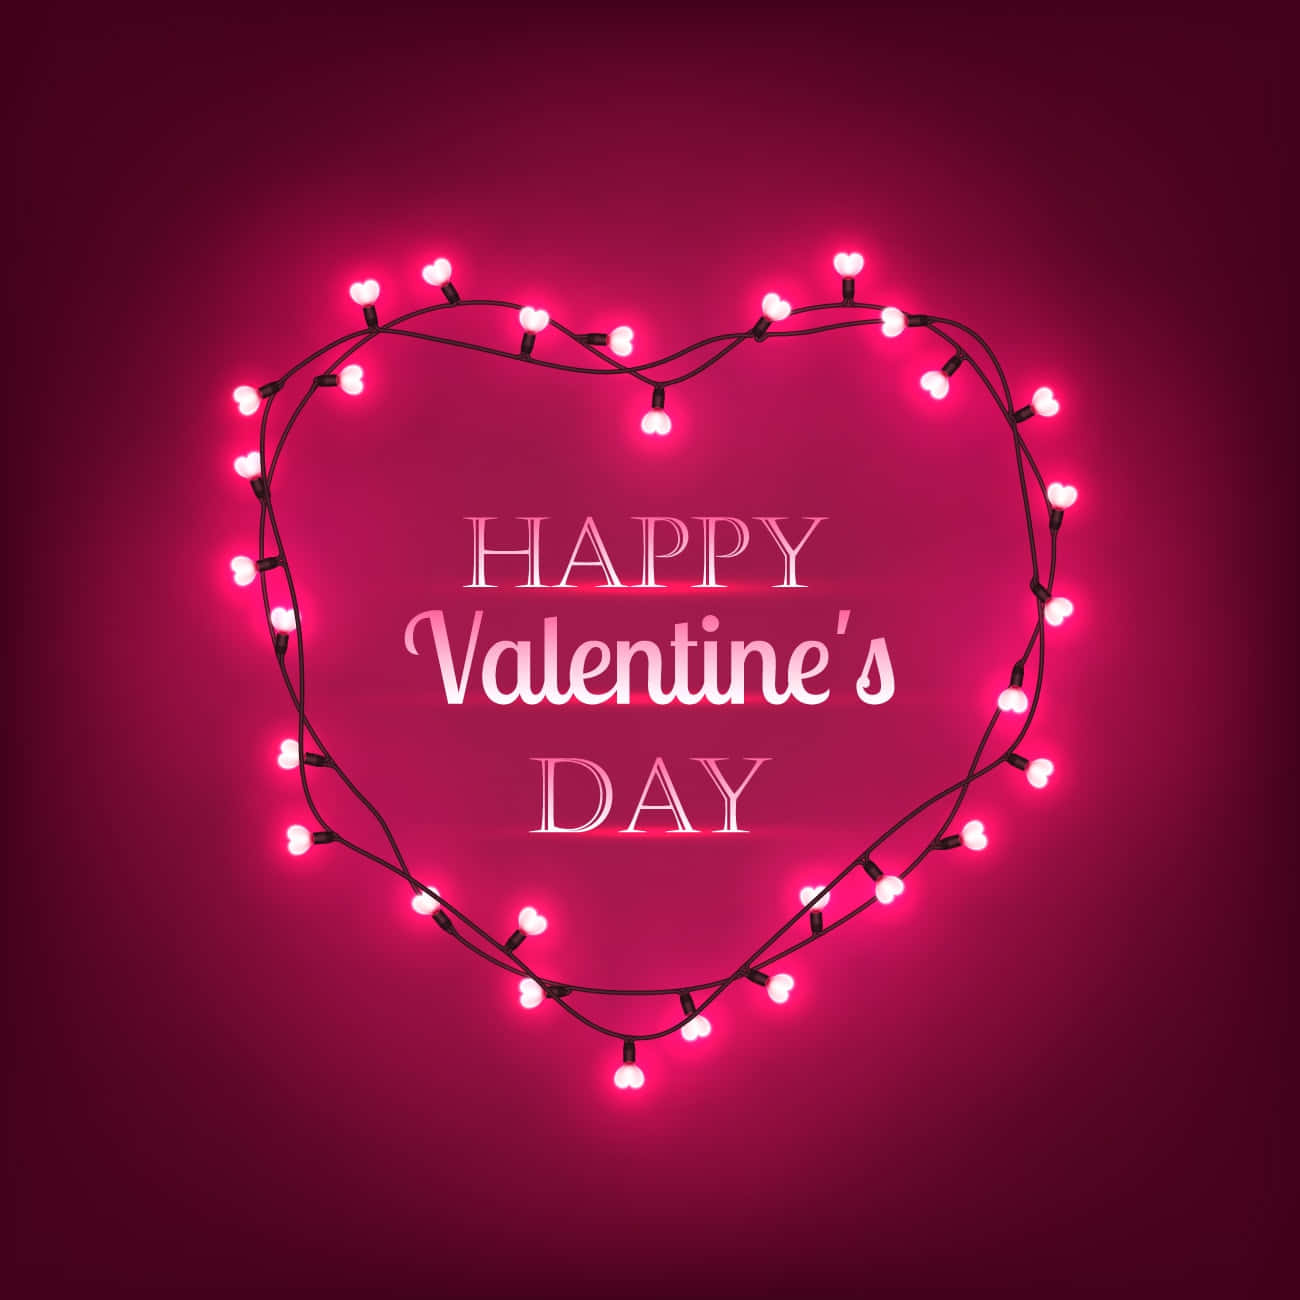 Image  "Celebrate the Love You Have this Valentine’s Day"